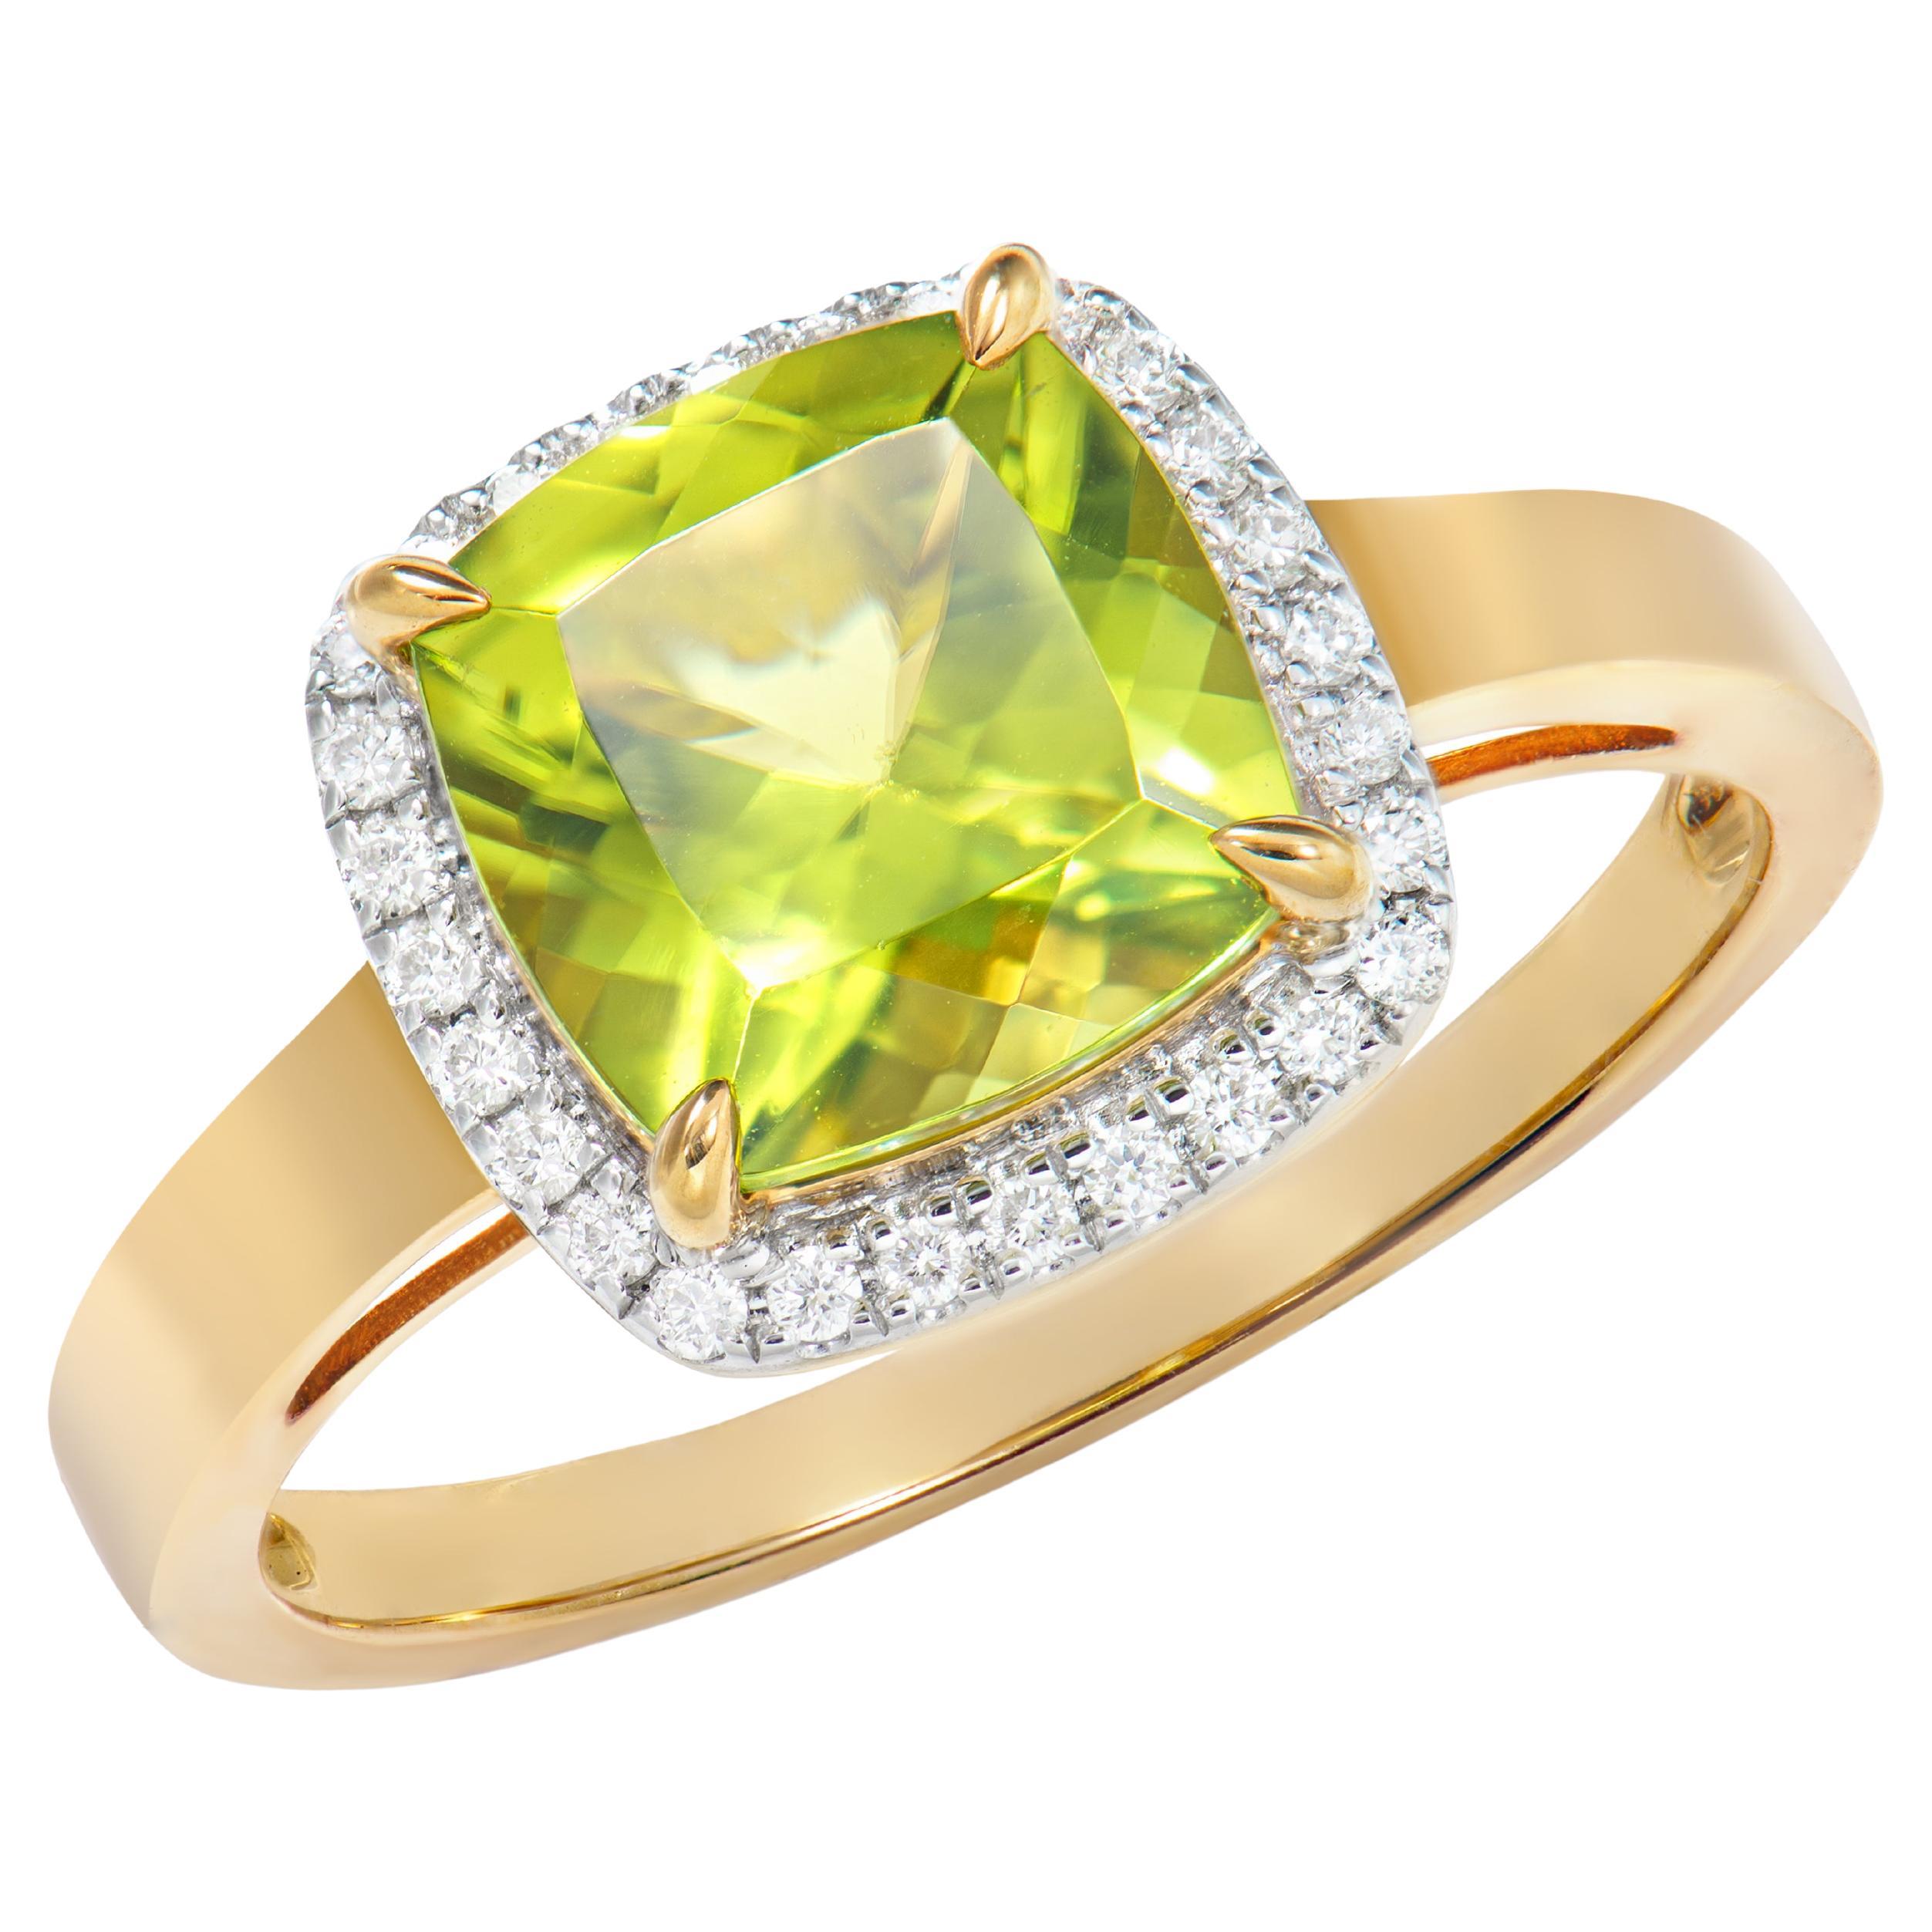 2.39 Carat Peridot Fancy Ring in 18Karat Yellow Gold with White Diamond.   For Sale